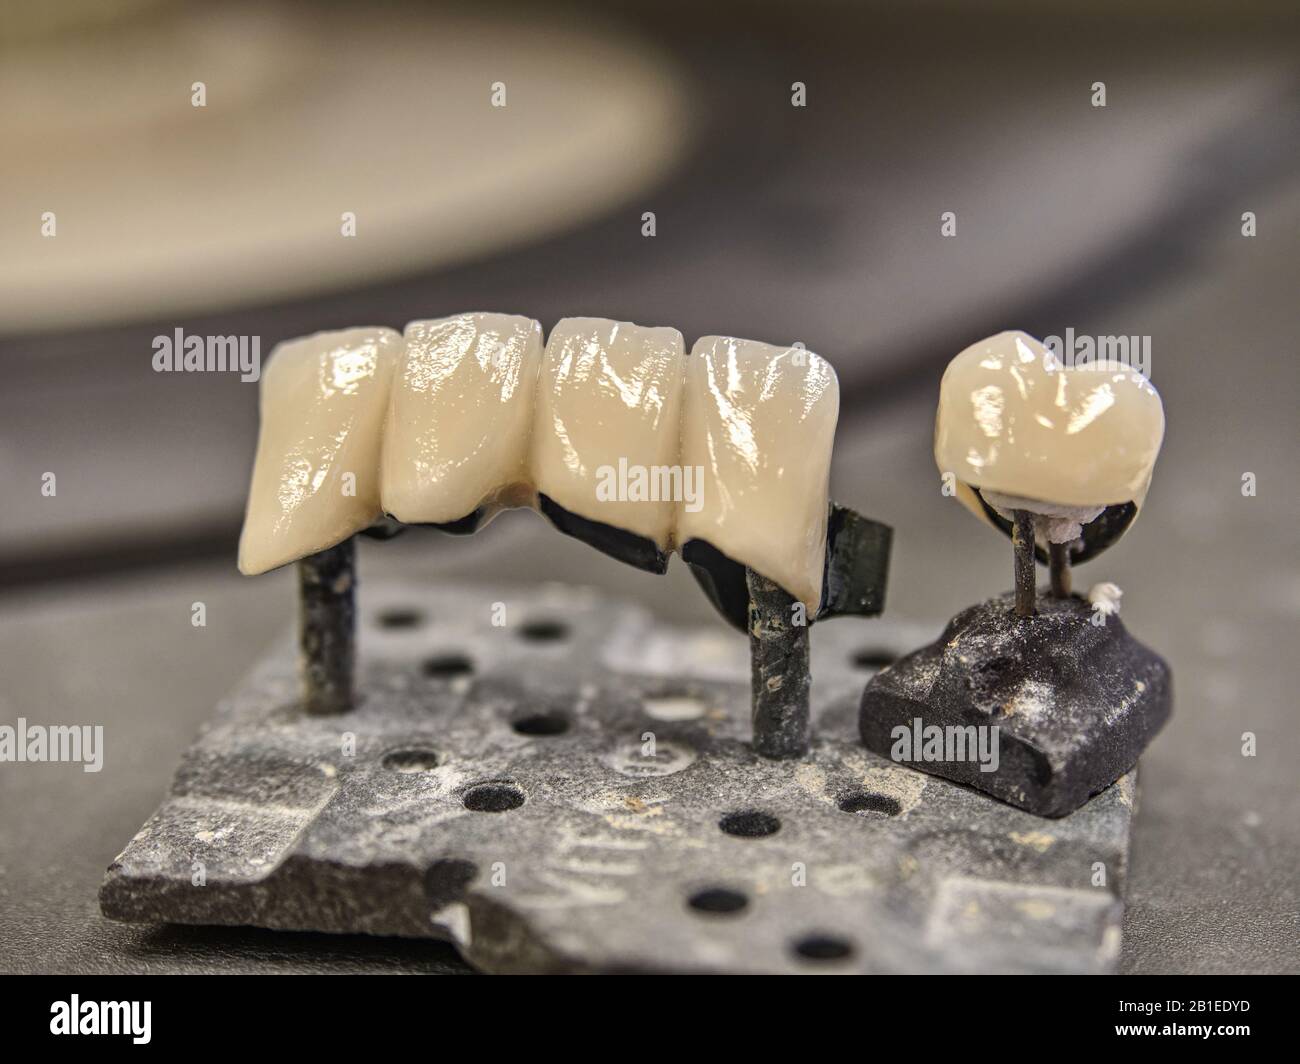 Laboratory furnace for ceramic tooth crowns and metal pins close-up macro. Orthopedic dentistry restoration decayed teeth Stock Photo